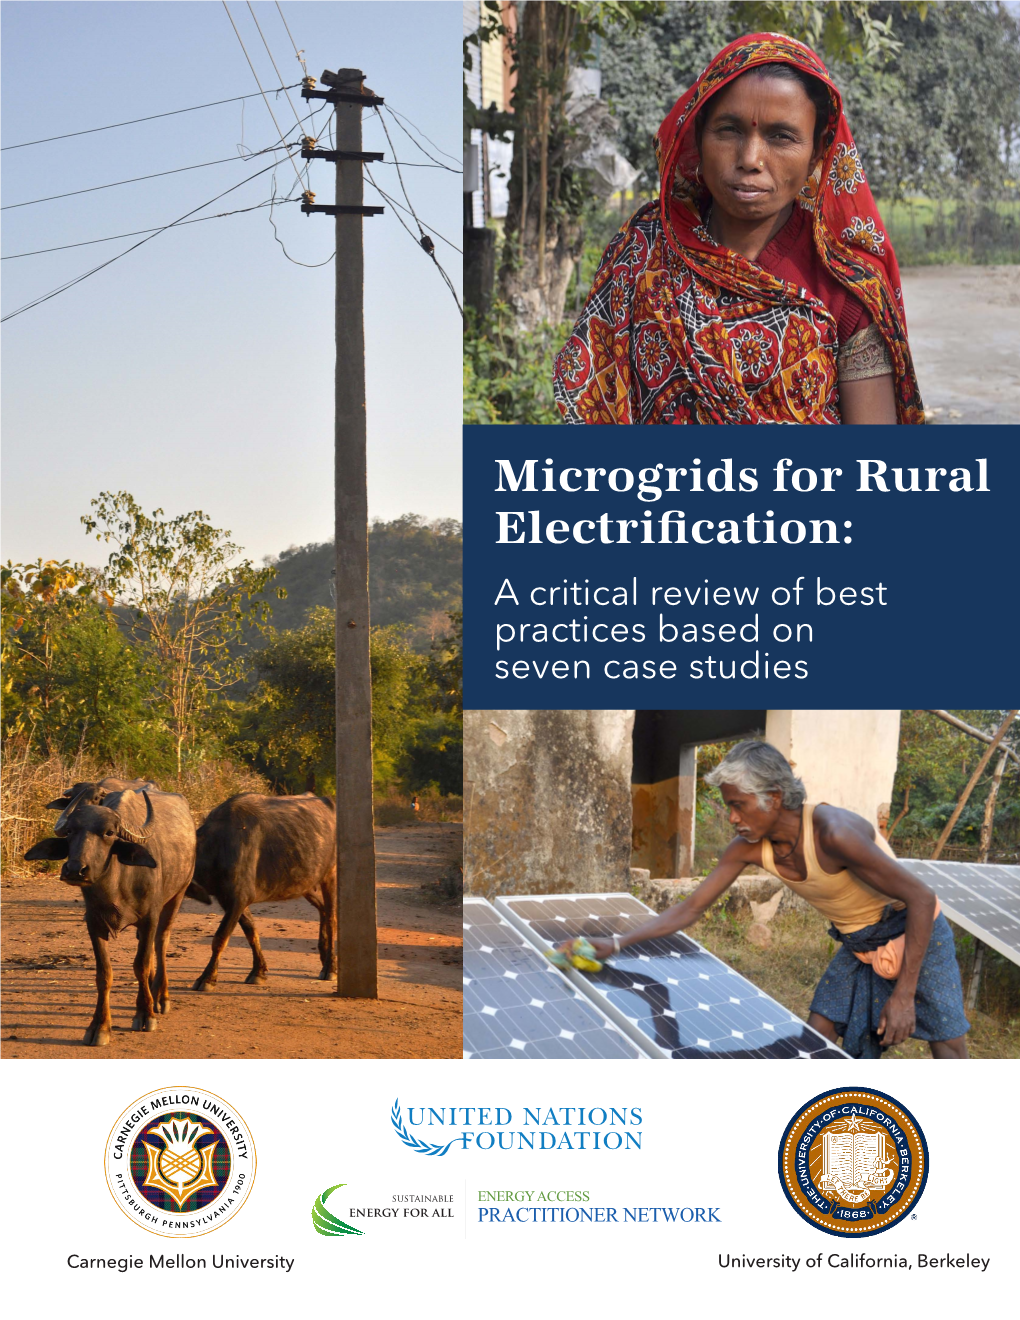 Microgrids for Rural Electrification: a Critical Review of Best Practices Based on Seven Case Studies